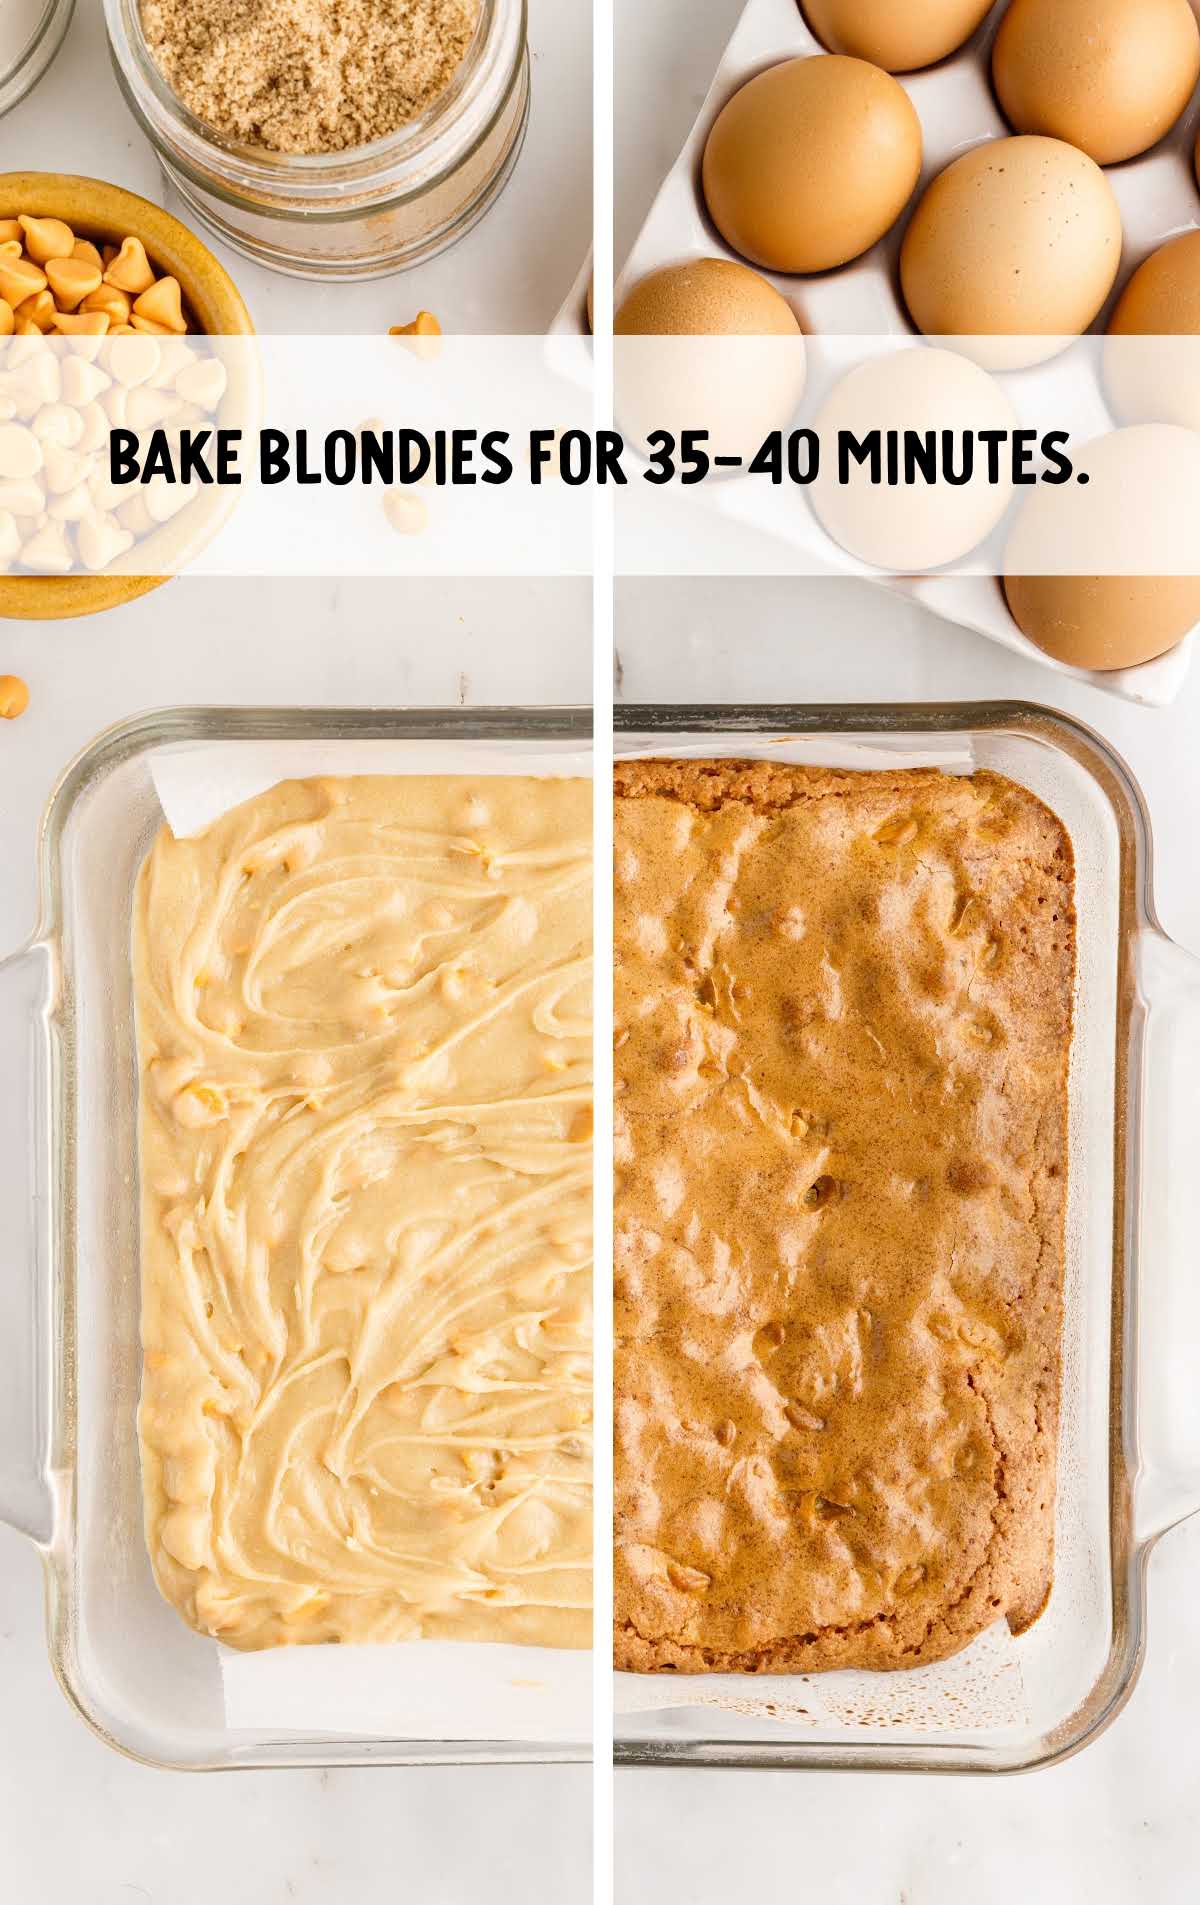 blondies baked for 35-40 minutes